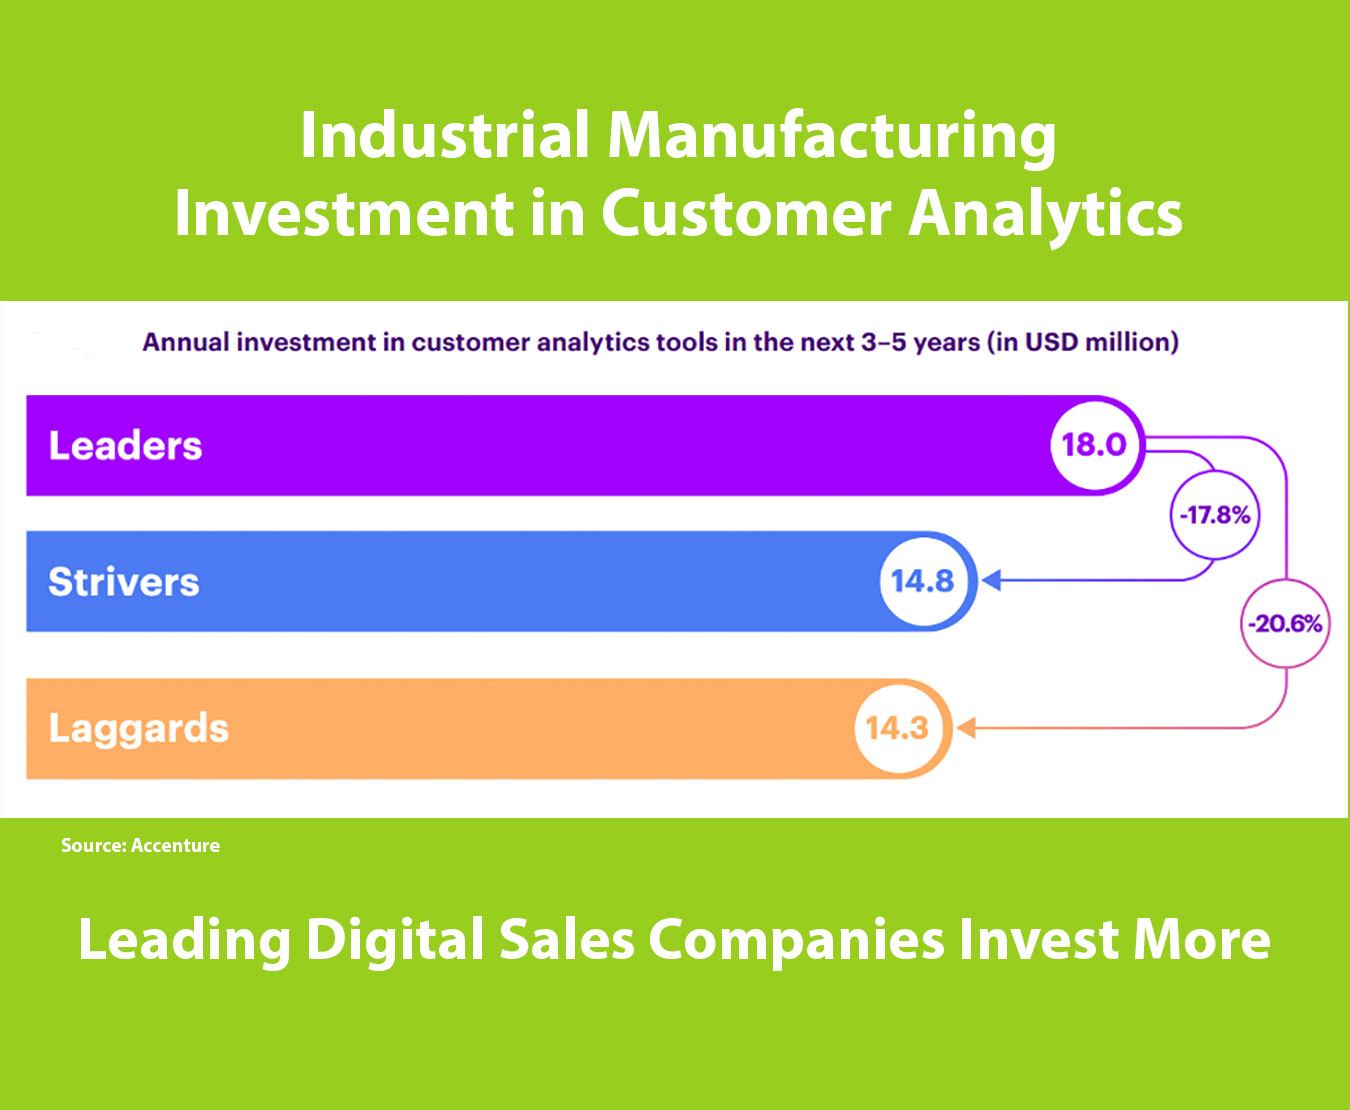 customer analytics for manufacturers: leading companies plan to invest $18 million in customer analytics tools in the next 3 to 5 years while strivers plan to invest $14.8 million and Laggards plan to invest $14.3 million.